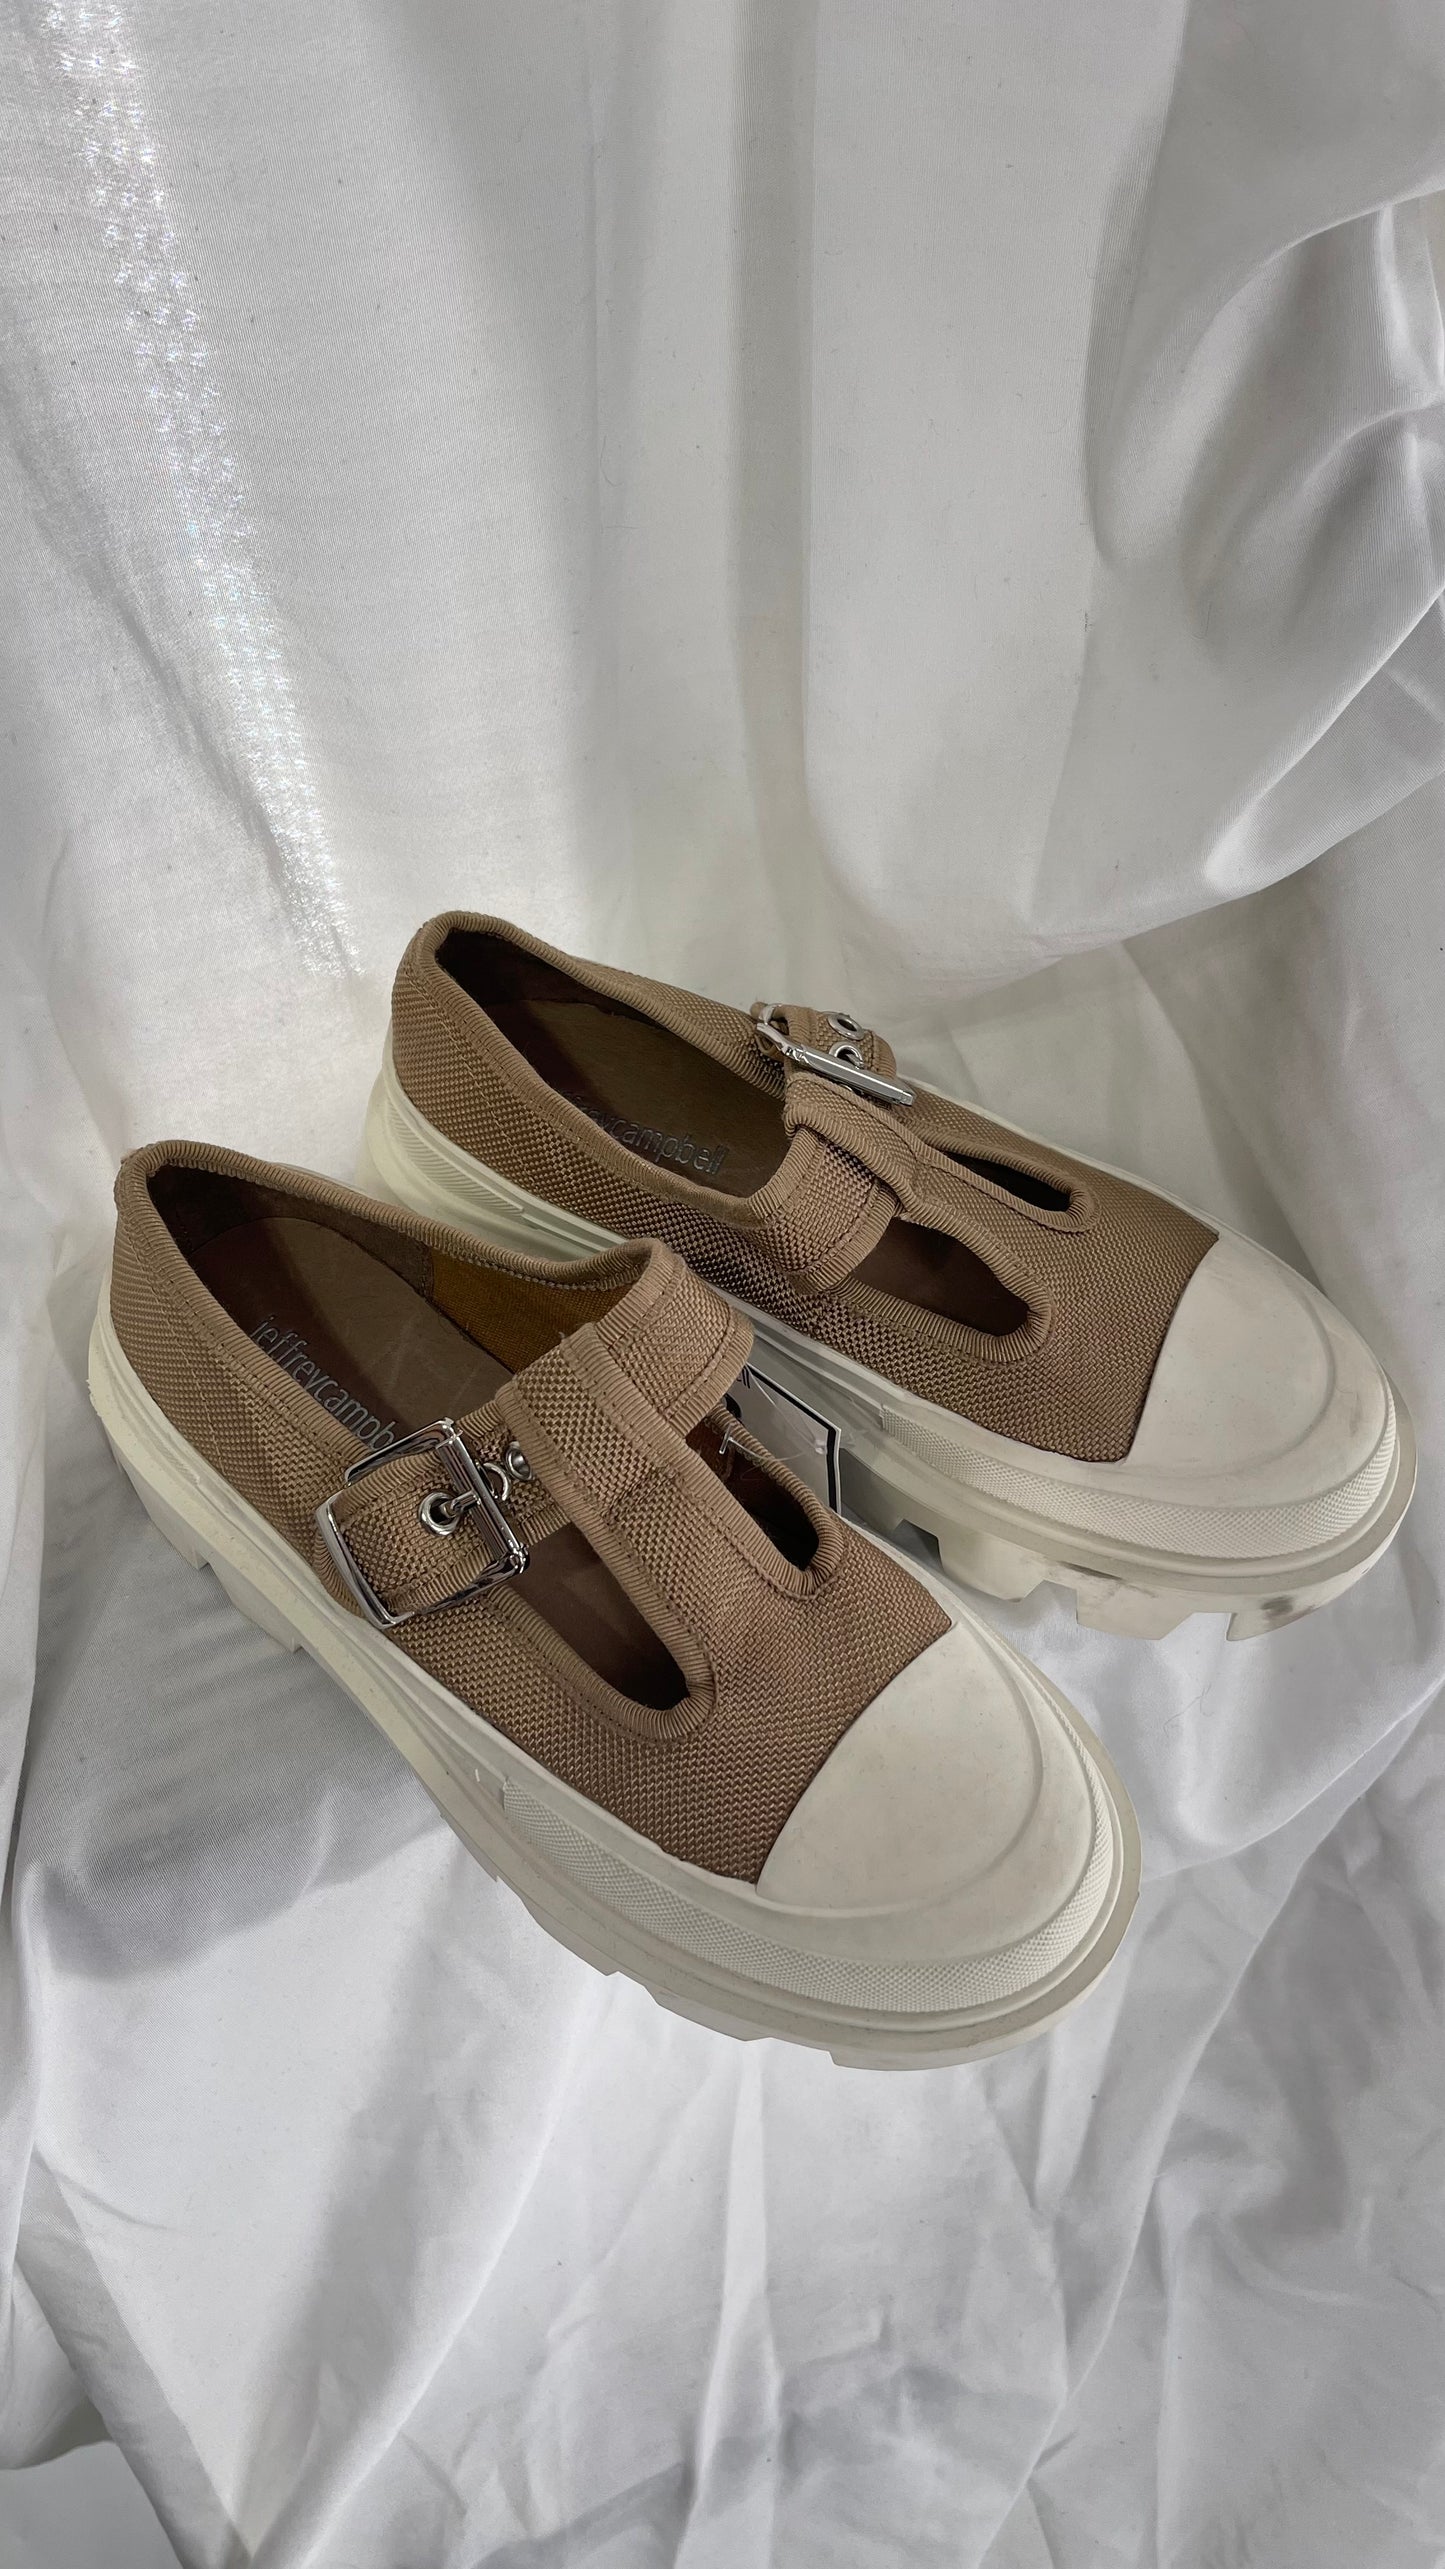 Jeffrey Campbell Marley Tan Canvas Mary Janes (6)